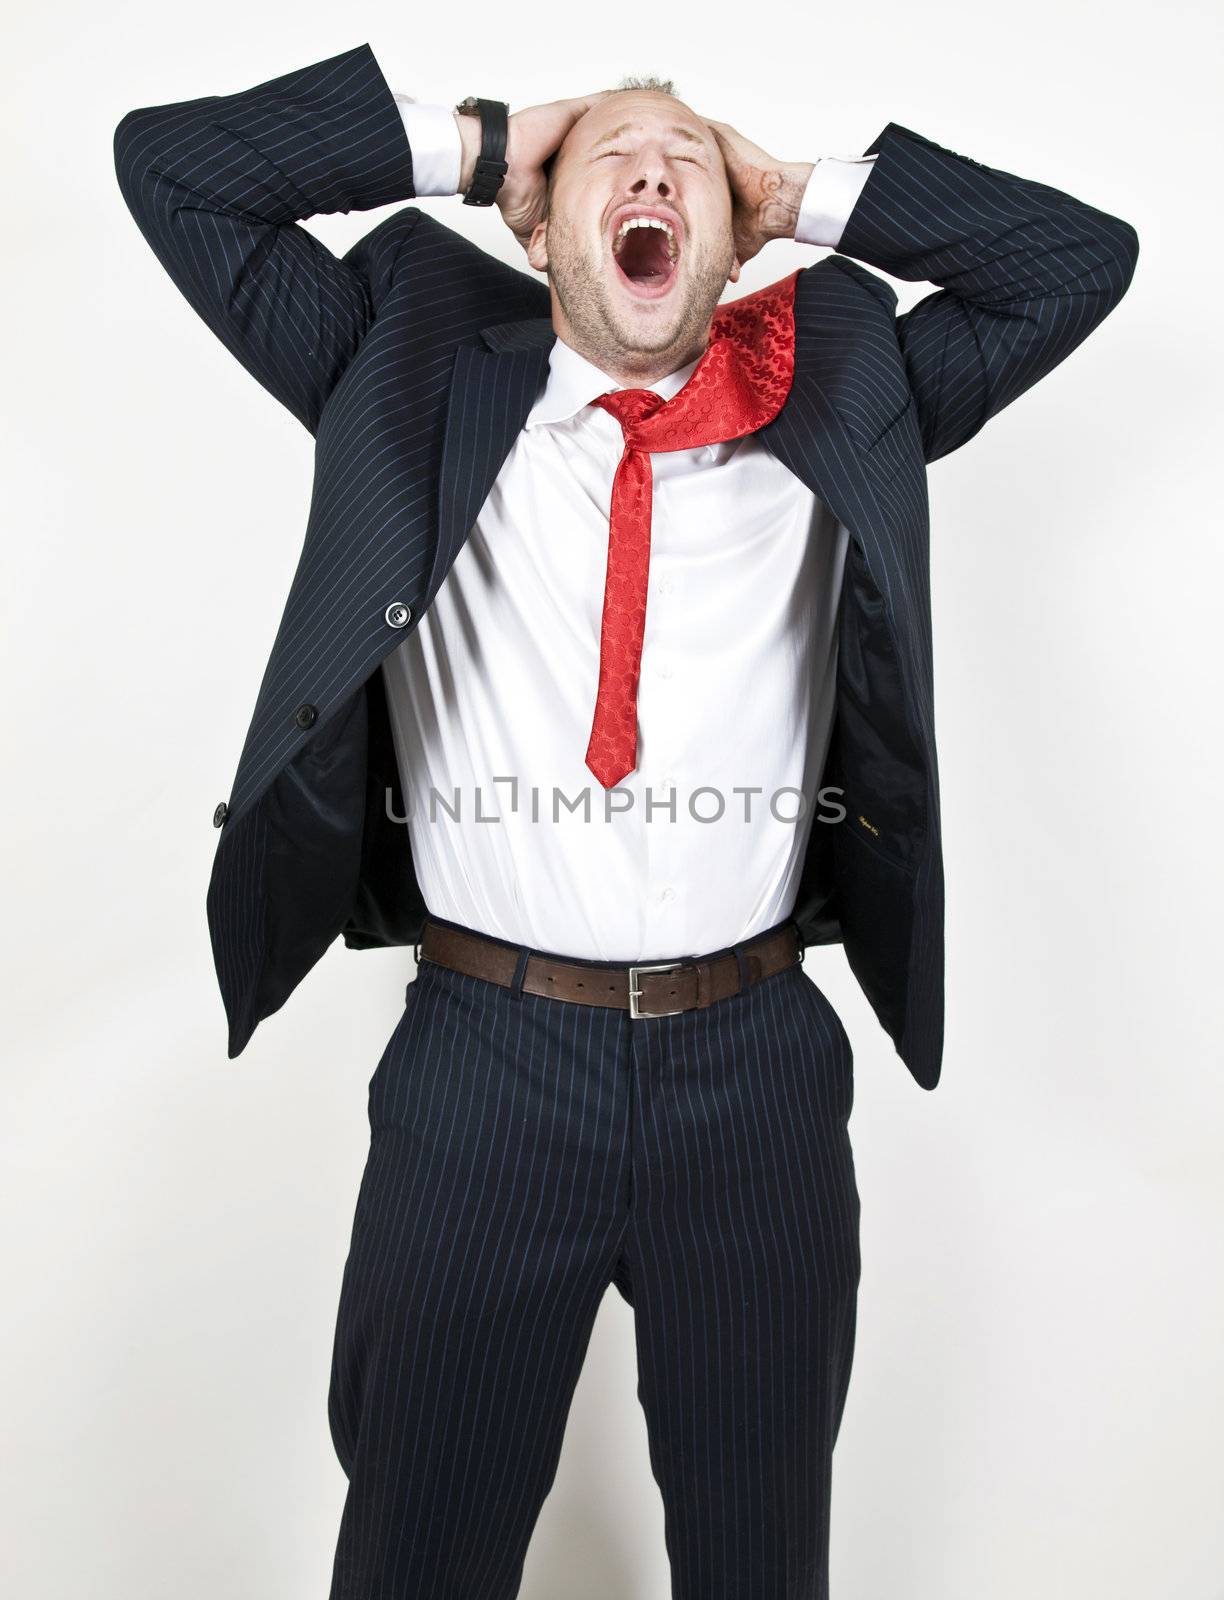 screaming businesman on isolated background
